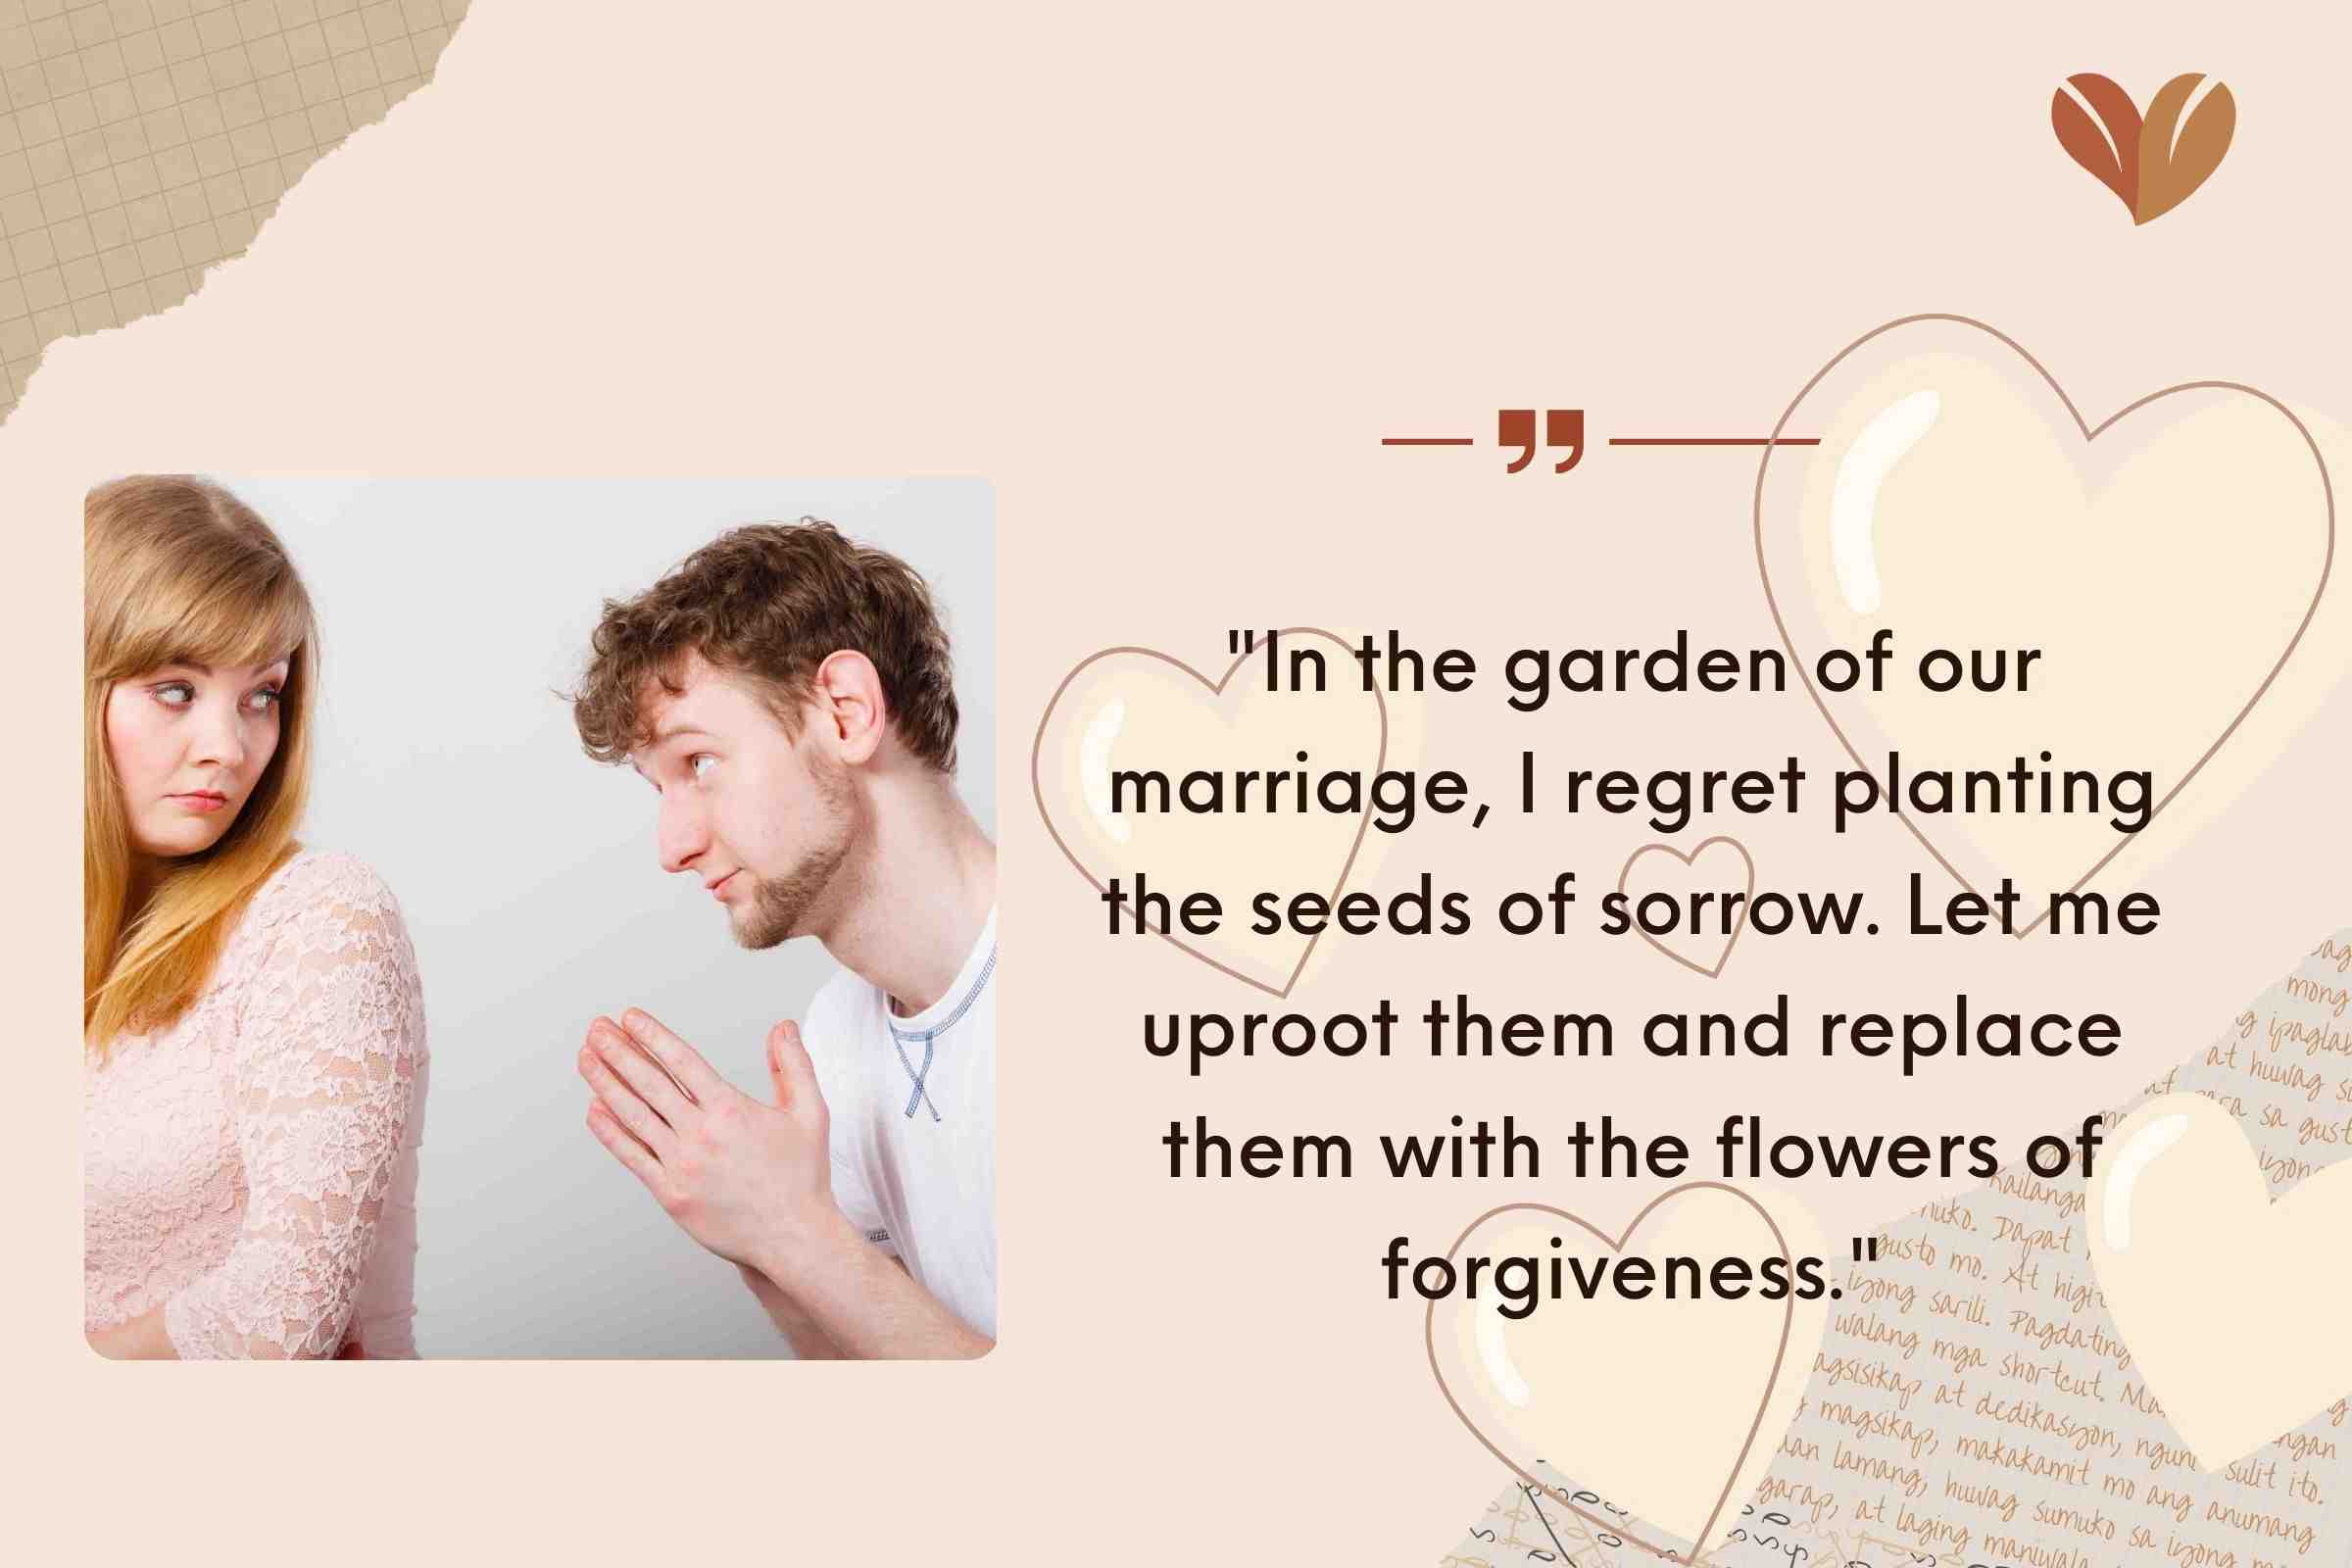 "In the garden of our marriage, I regret planting the seeds of sorrow. Let me uproot them and replace them with the flowers of forgiveness."